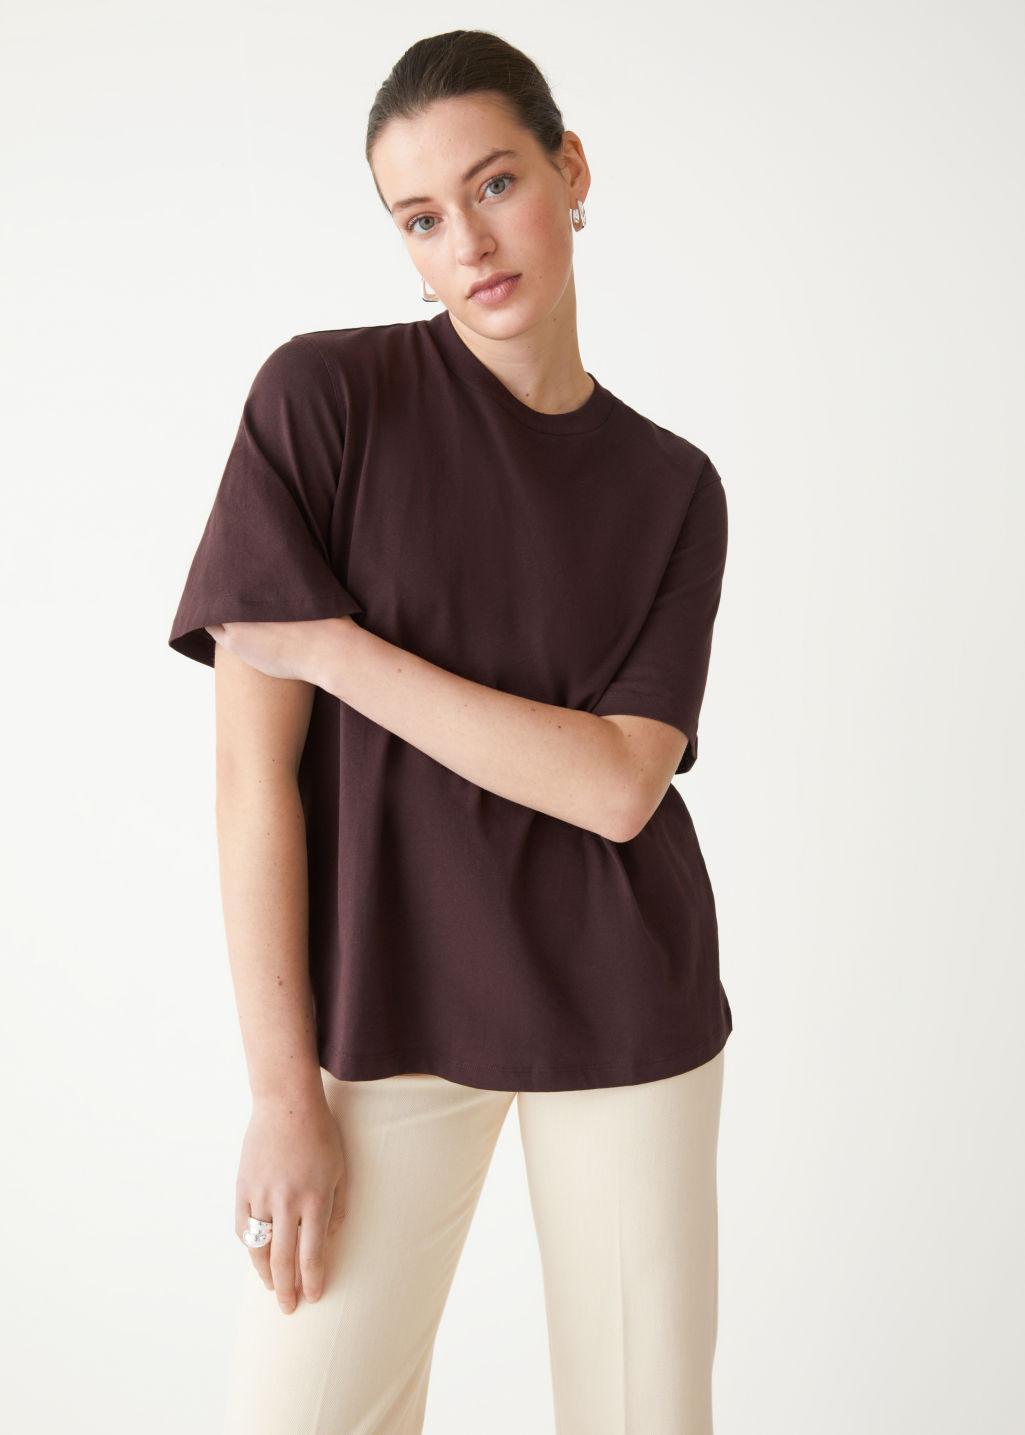 & Other Stories Wide Sleeve Crewneck T-shirt in Brown | Lyst